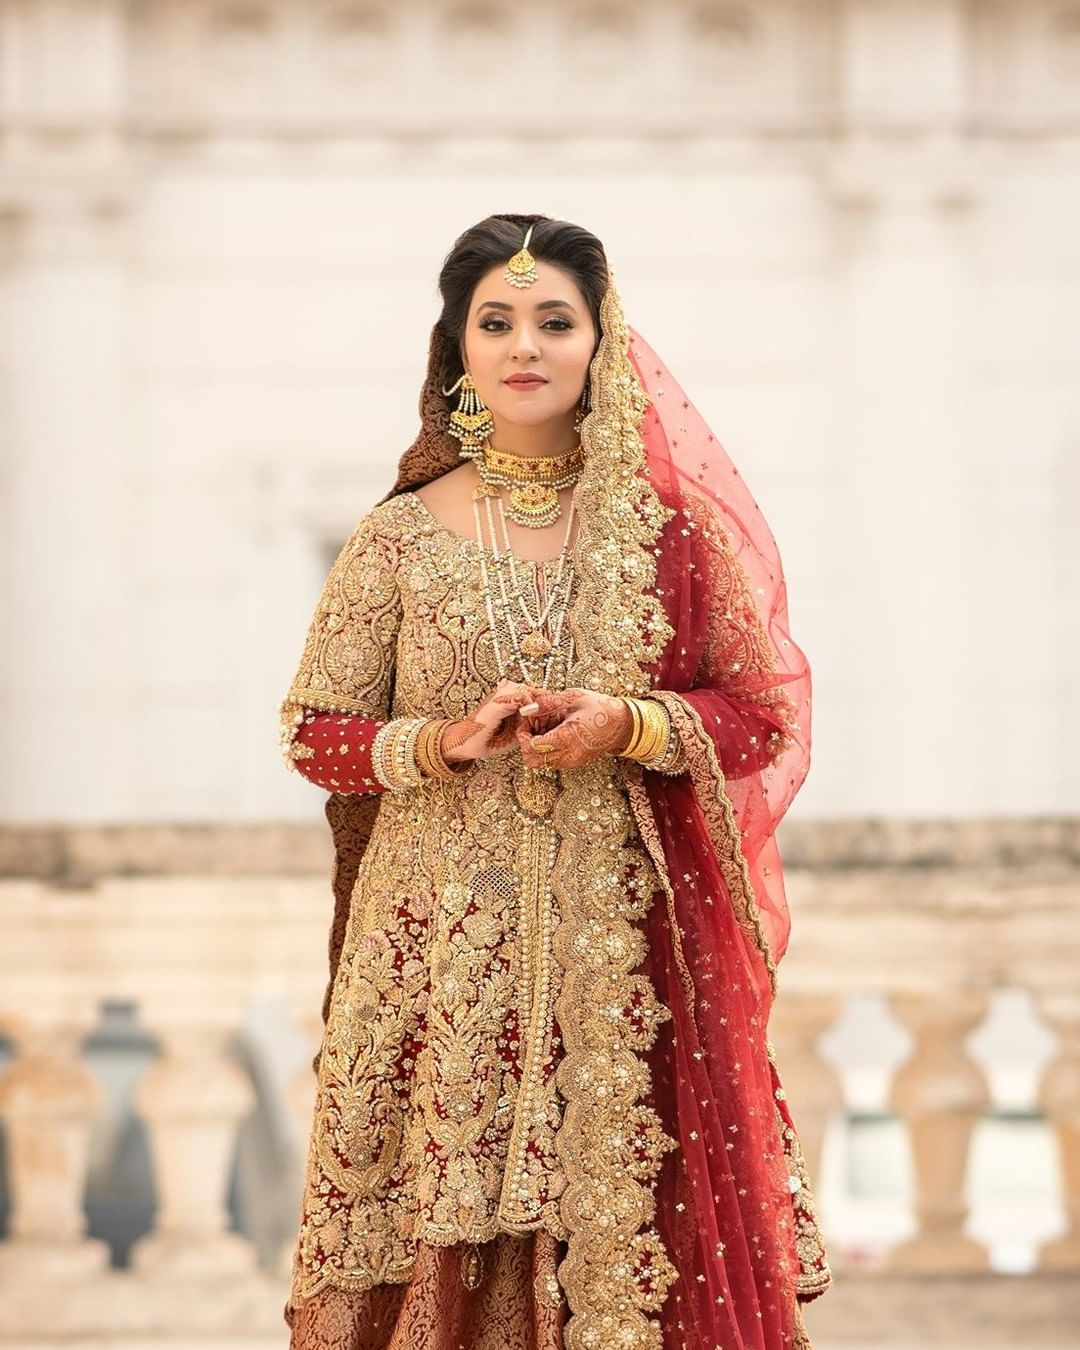 Bunaai - Give the lehenga a fun twist with a peplum jacket. The grey jacket  lehenga with golden detailing and tassels is the perfect combination of  ethnic and modern. Dance around looking